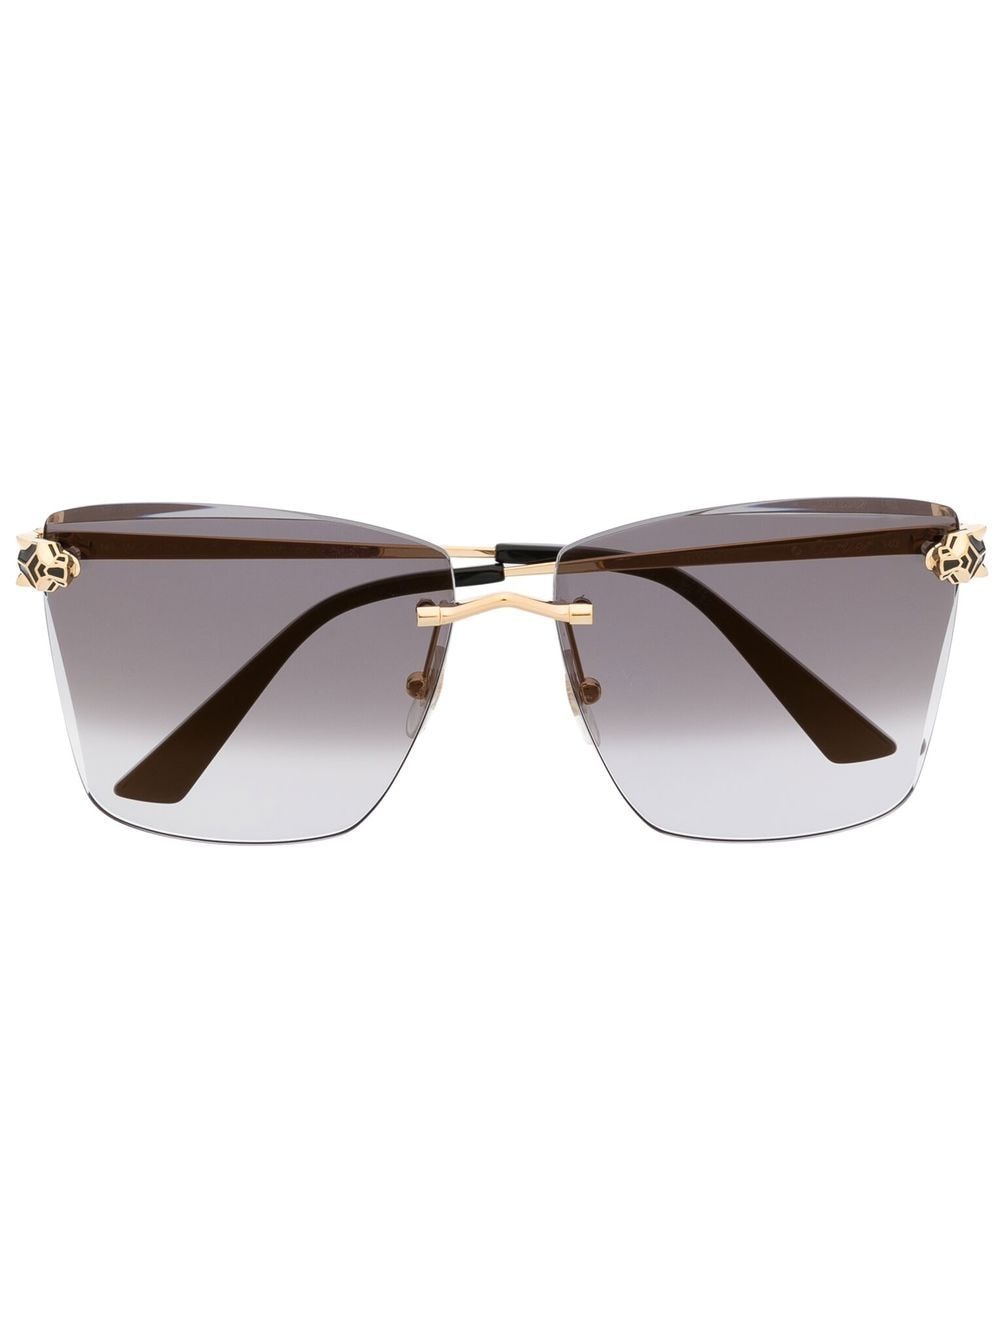 Cartier Panther Frameless Glasses In Gold